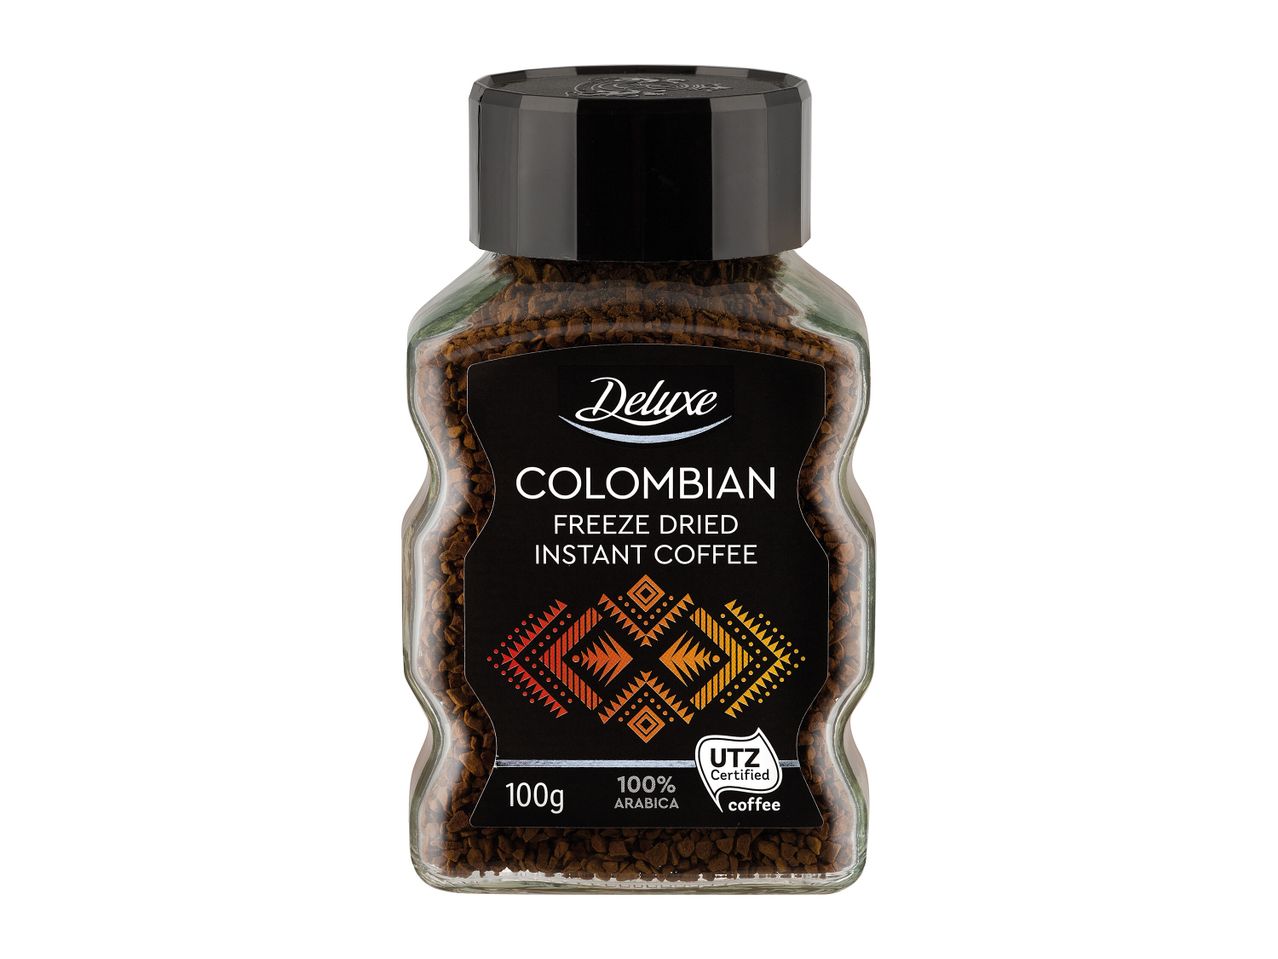 Go to full screen view: Deluxe Columbian Freeze-Dried Instant Coffee - Image 1